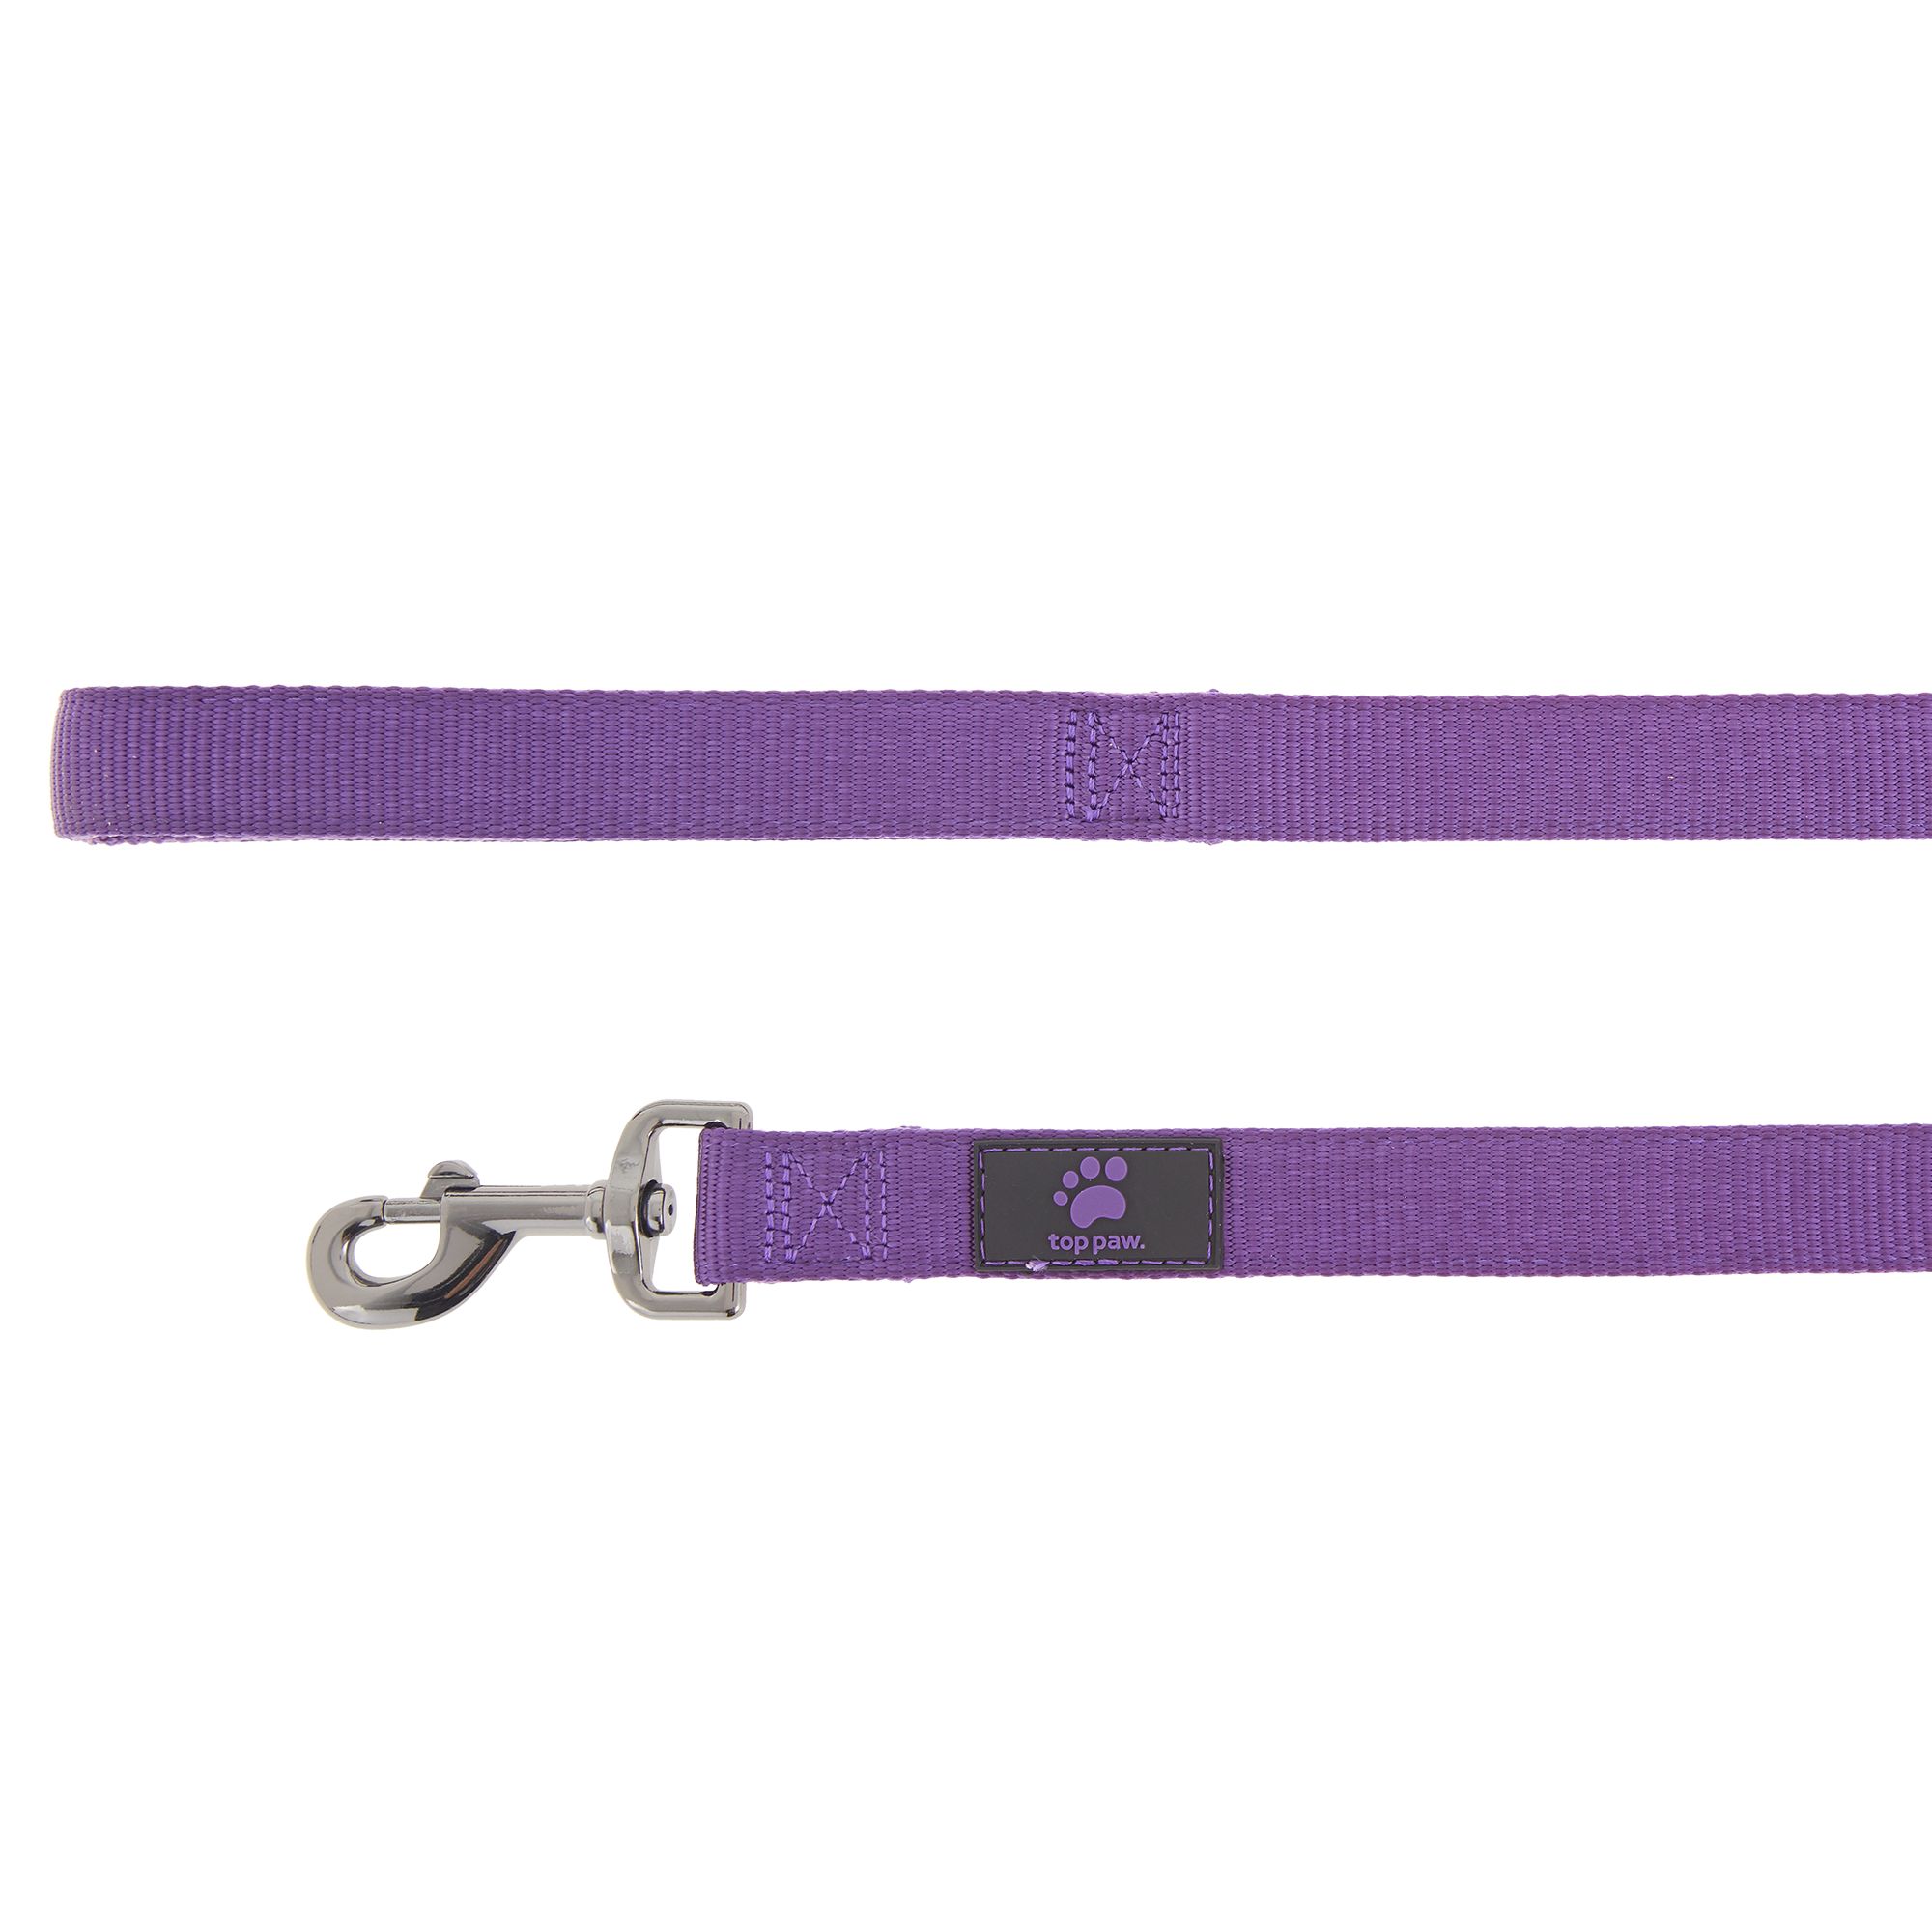 top paw leash 6ft